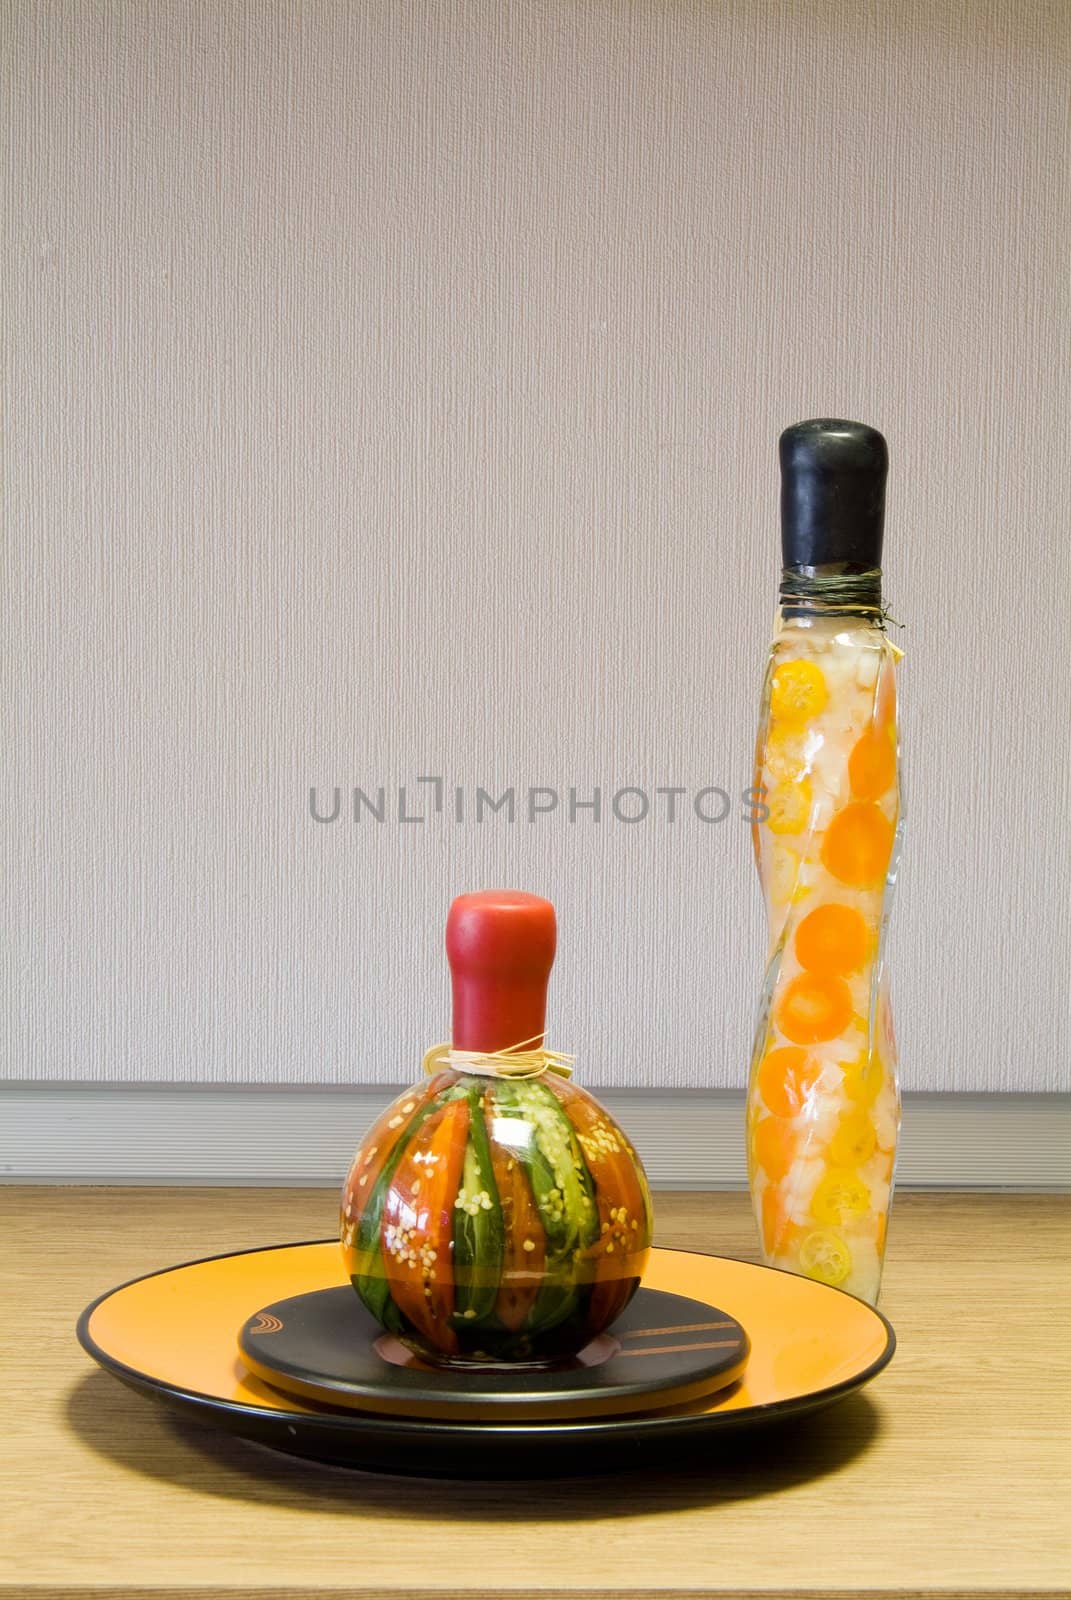 Decorative bottles and the ceramic plate on the table by palomnik